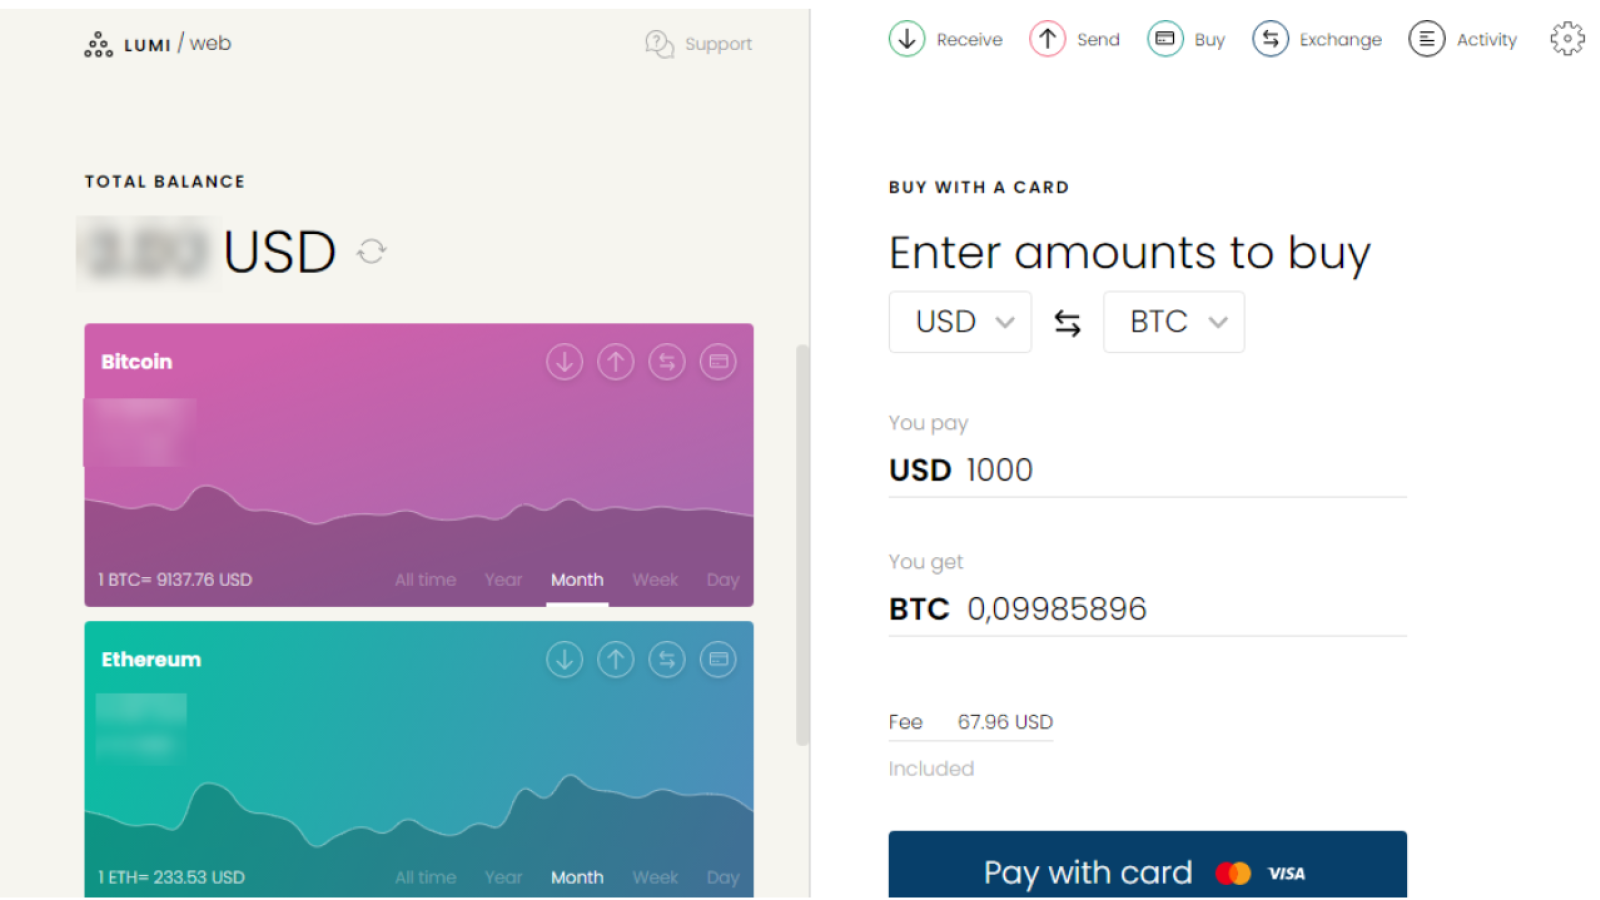 How to Buy Bitcoin with Lumi wallet